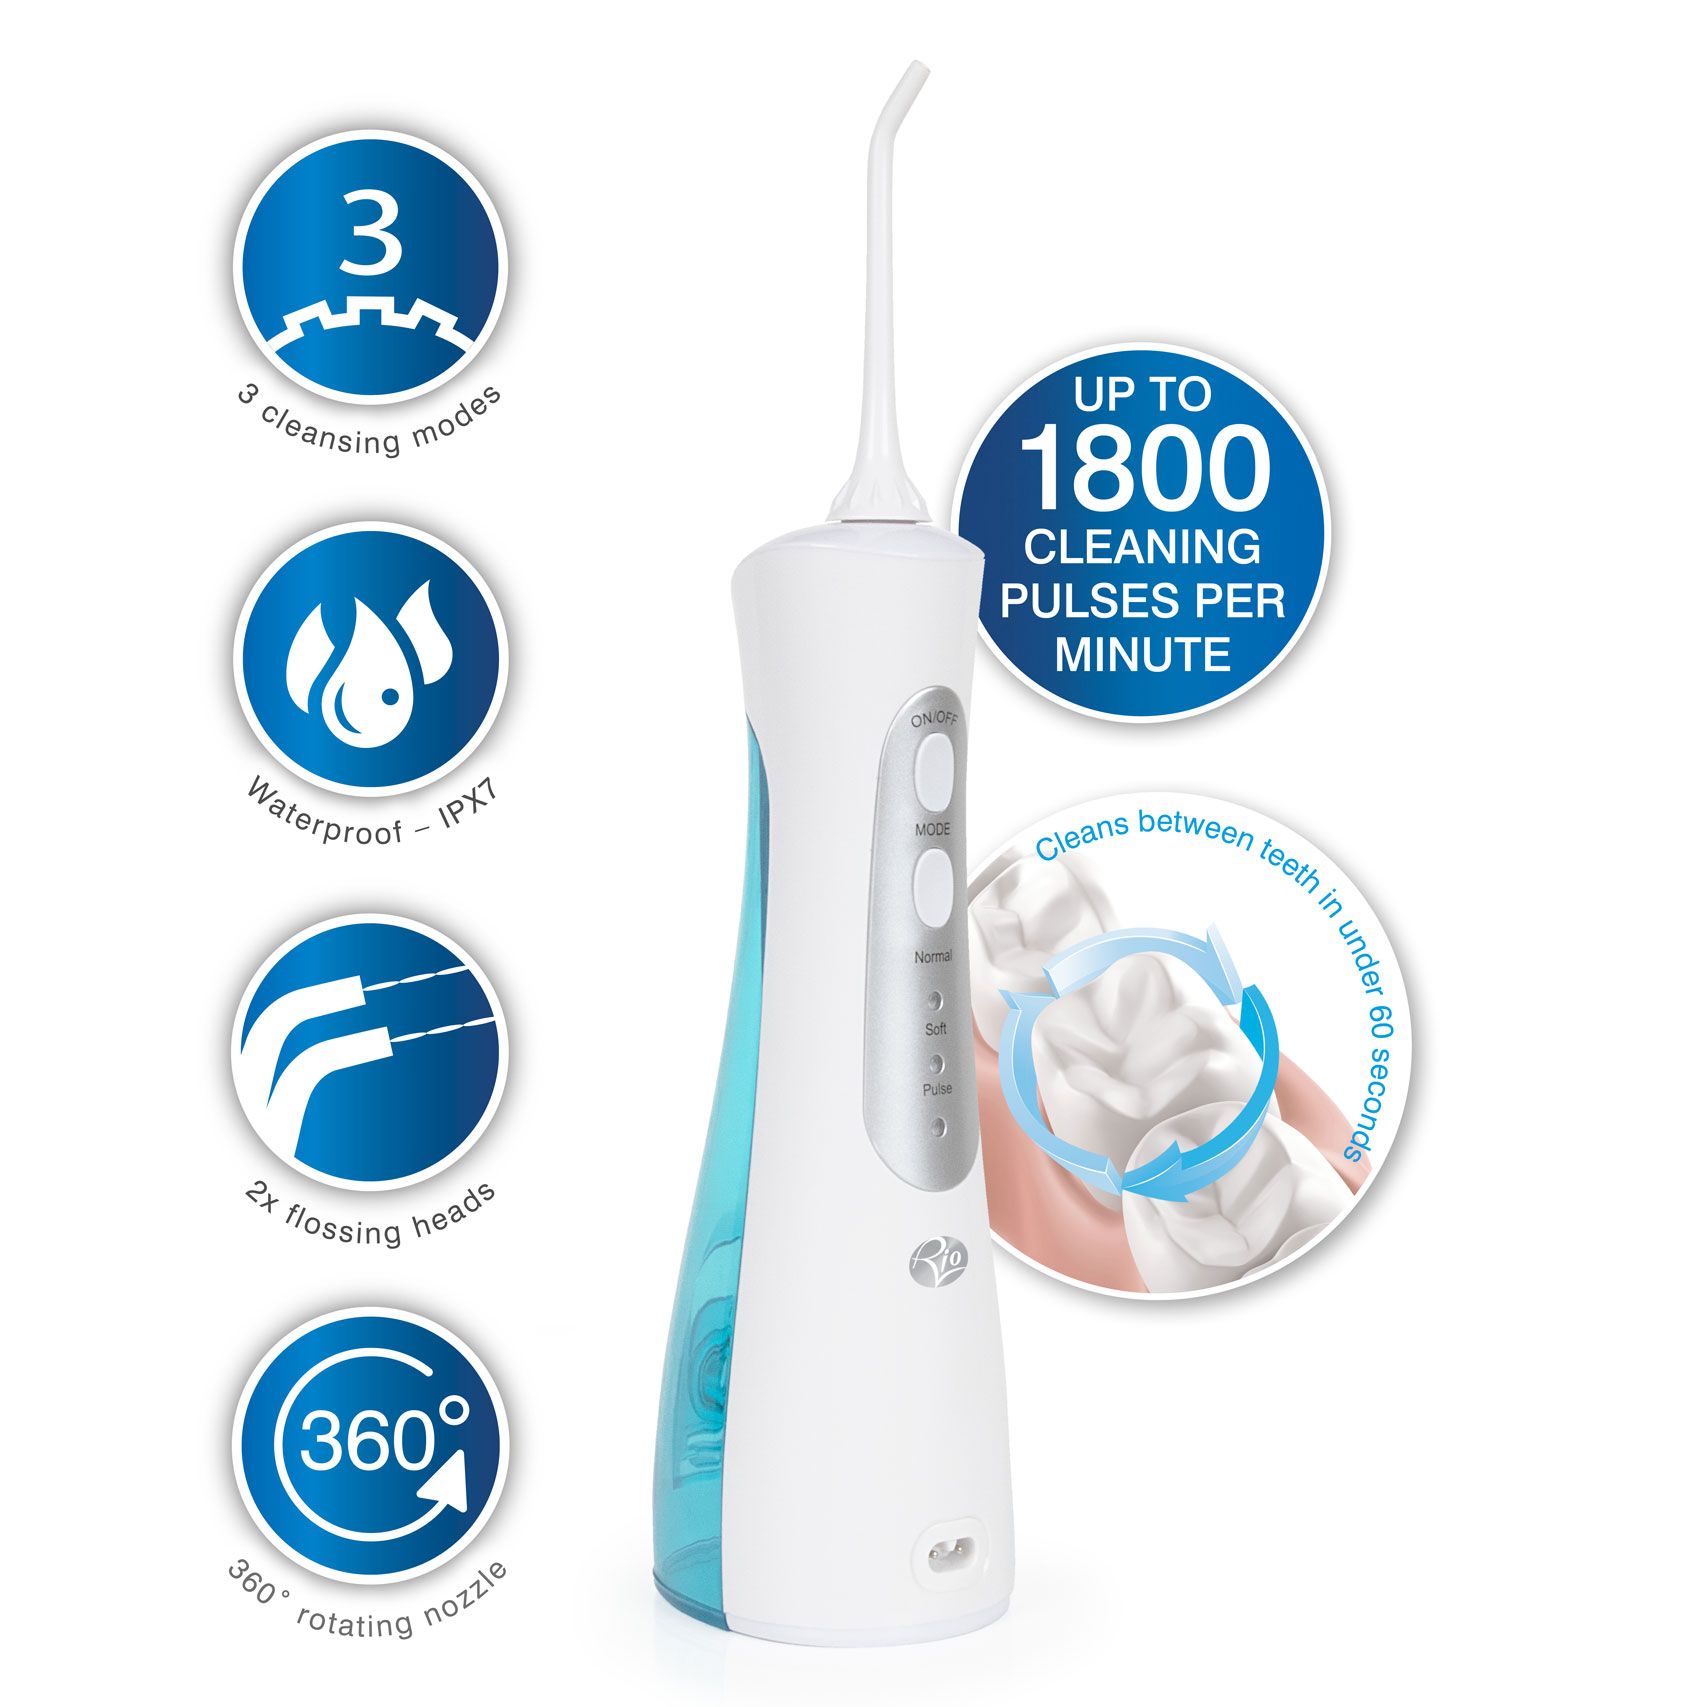 rio water flosser and irrigator with illustrated features: 3 cleaning modes, waterproof IPX7, 2x flossing heads, 360 degree rotating nozzle, up to 1800 cleaning pulses per minutes and cleans teeth in under 60 seconds